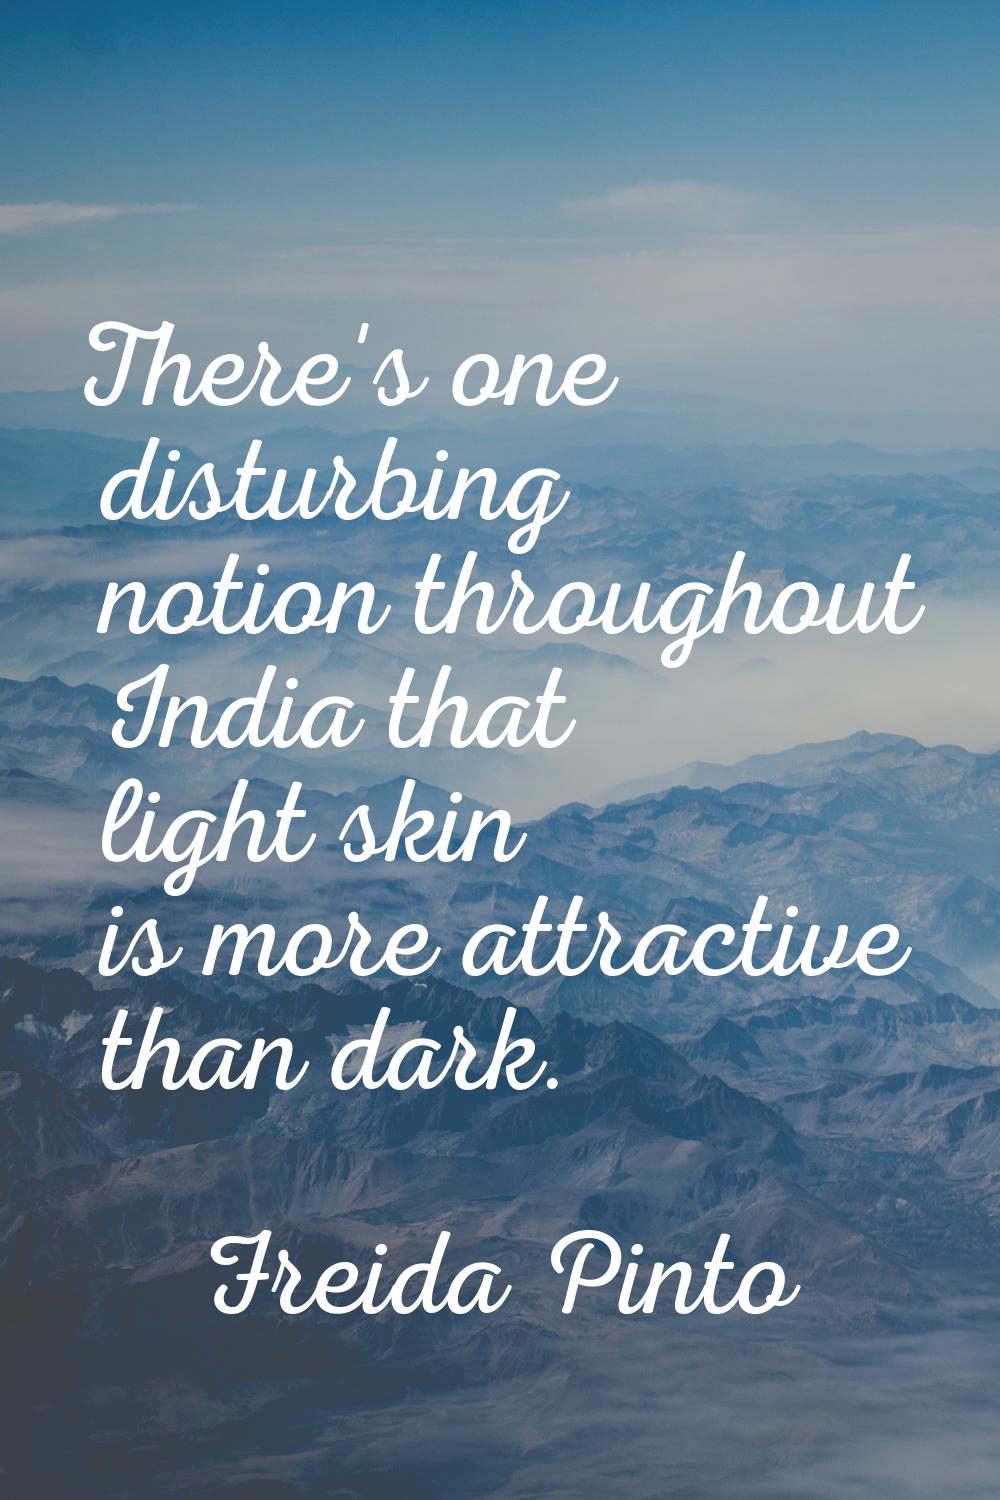 There's one disturbing notion throughout India that light skin is more attractive than dark.